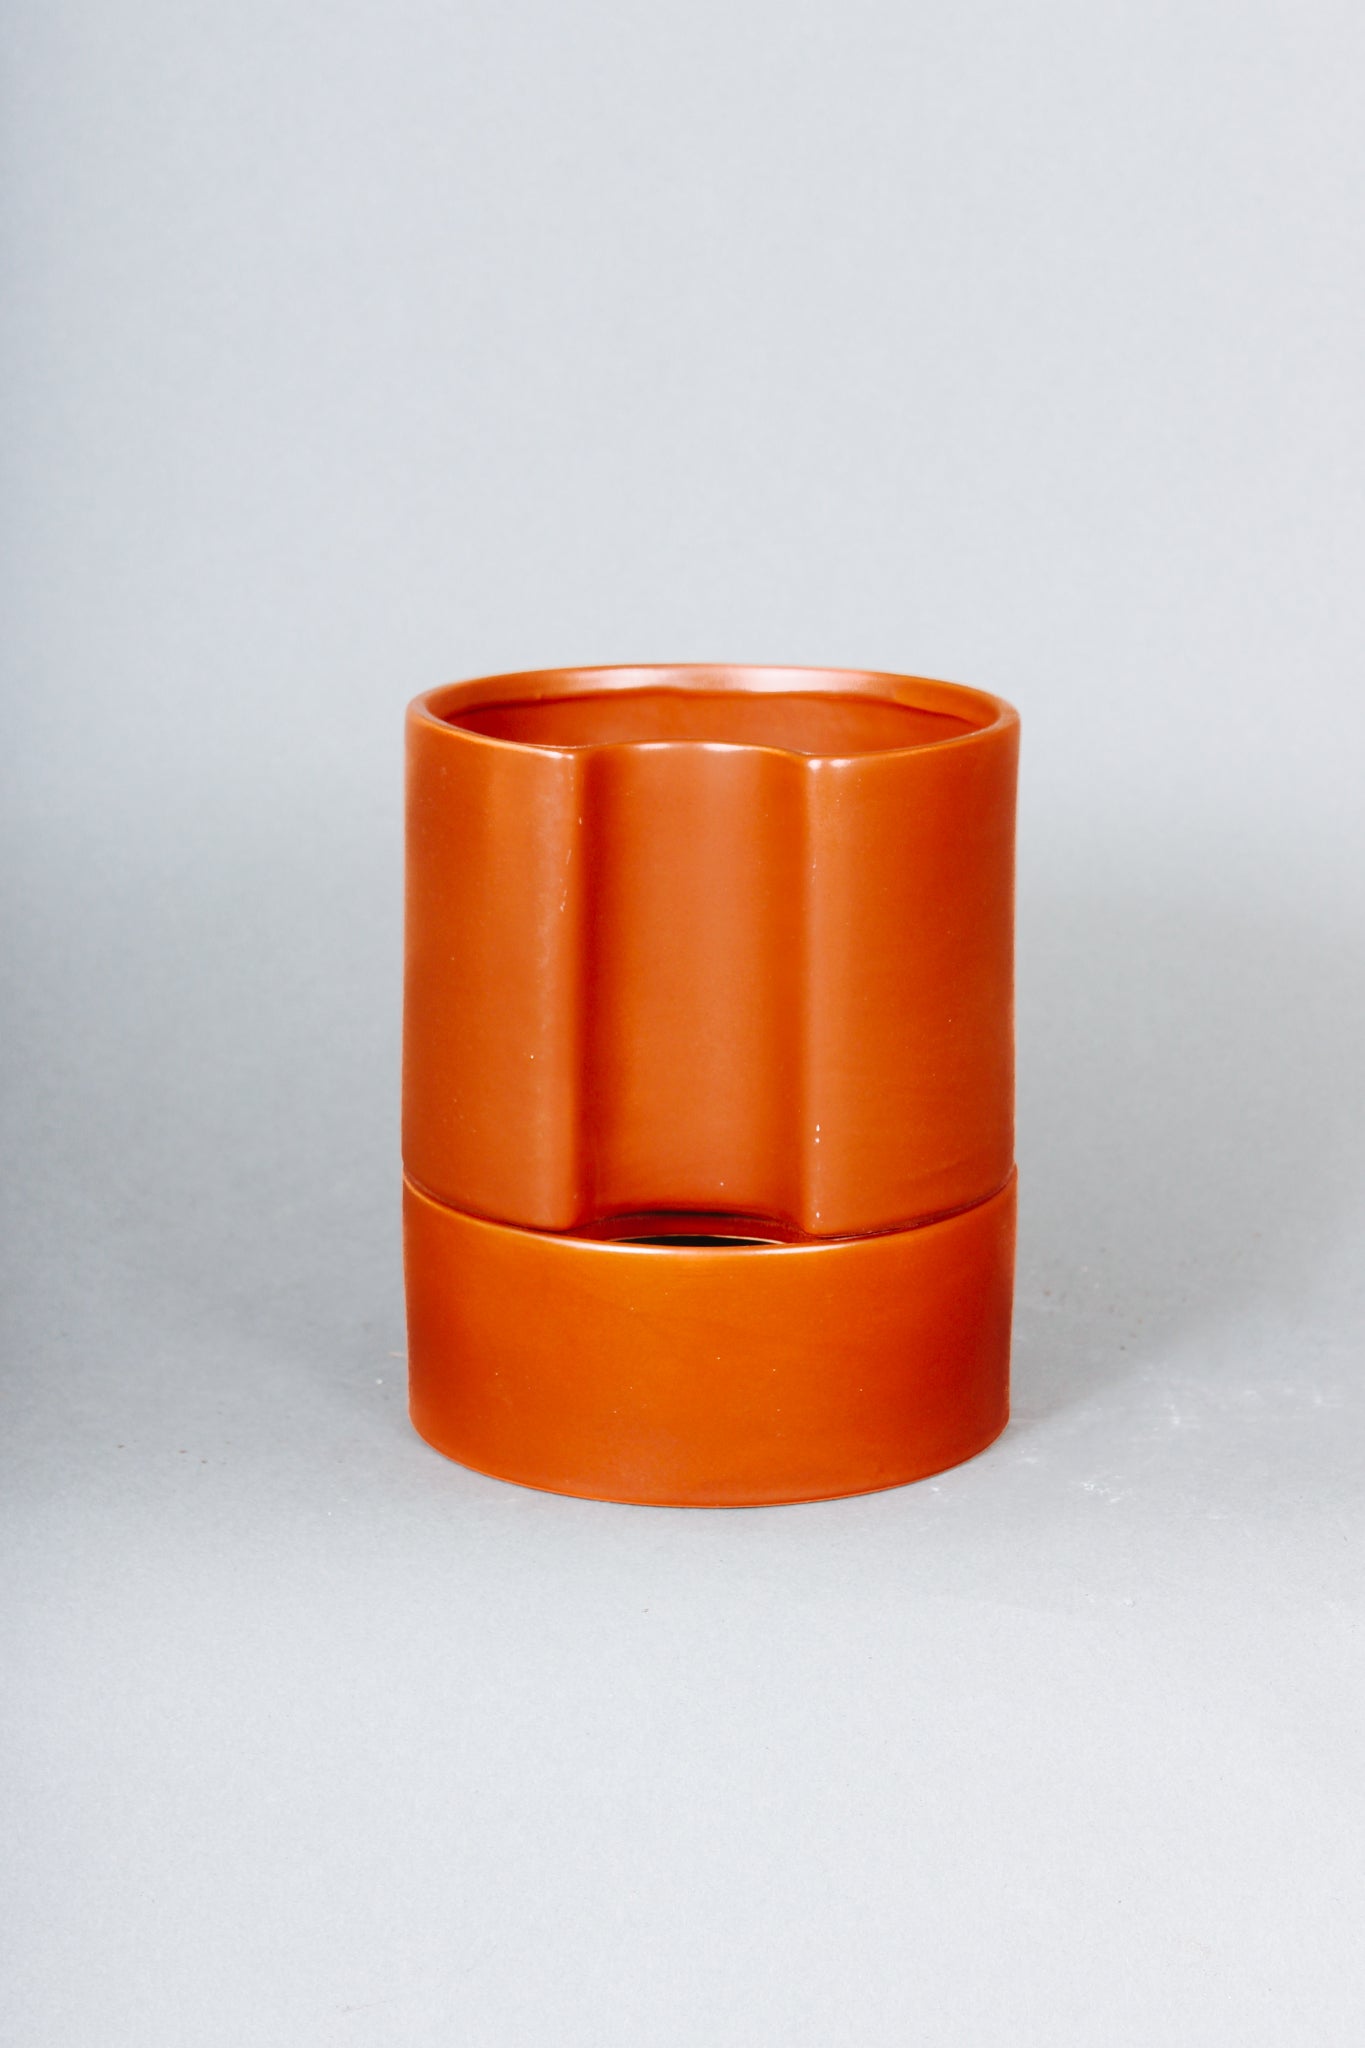 Terracotta self watering pot uses absorbent thread and a water reservoir to deliver water to the plant&